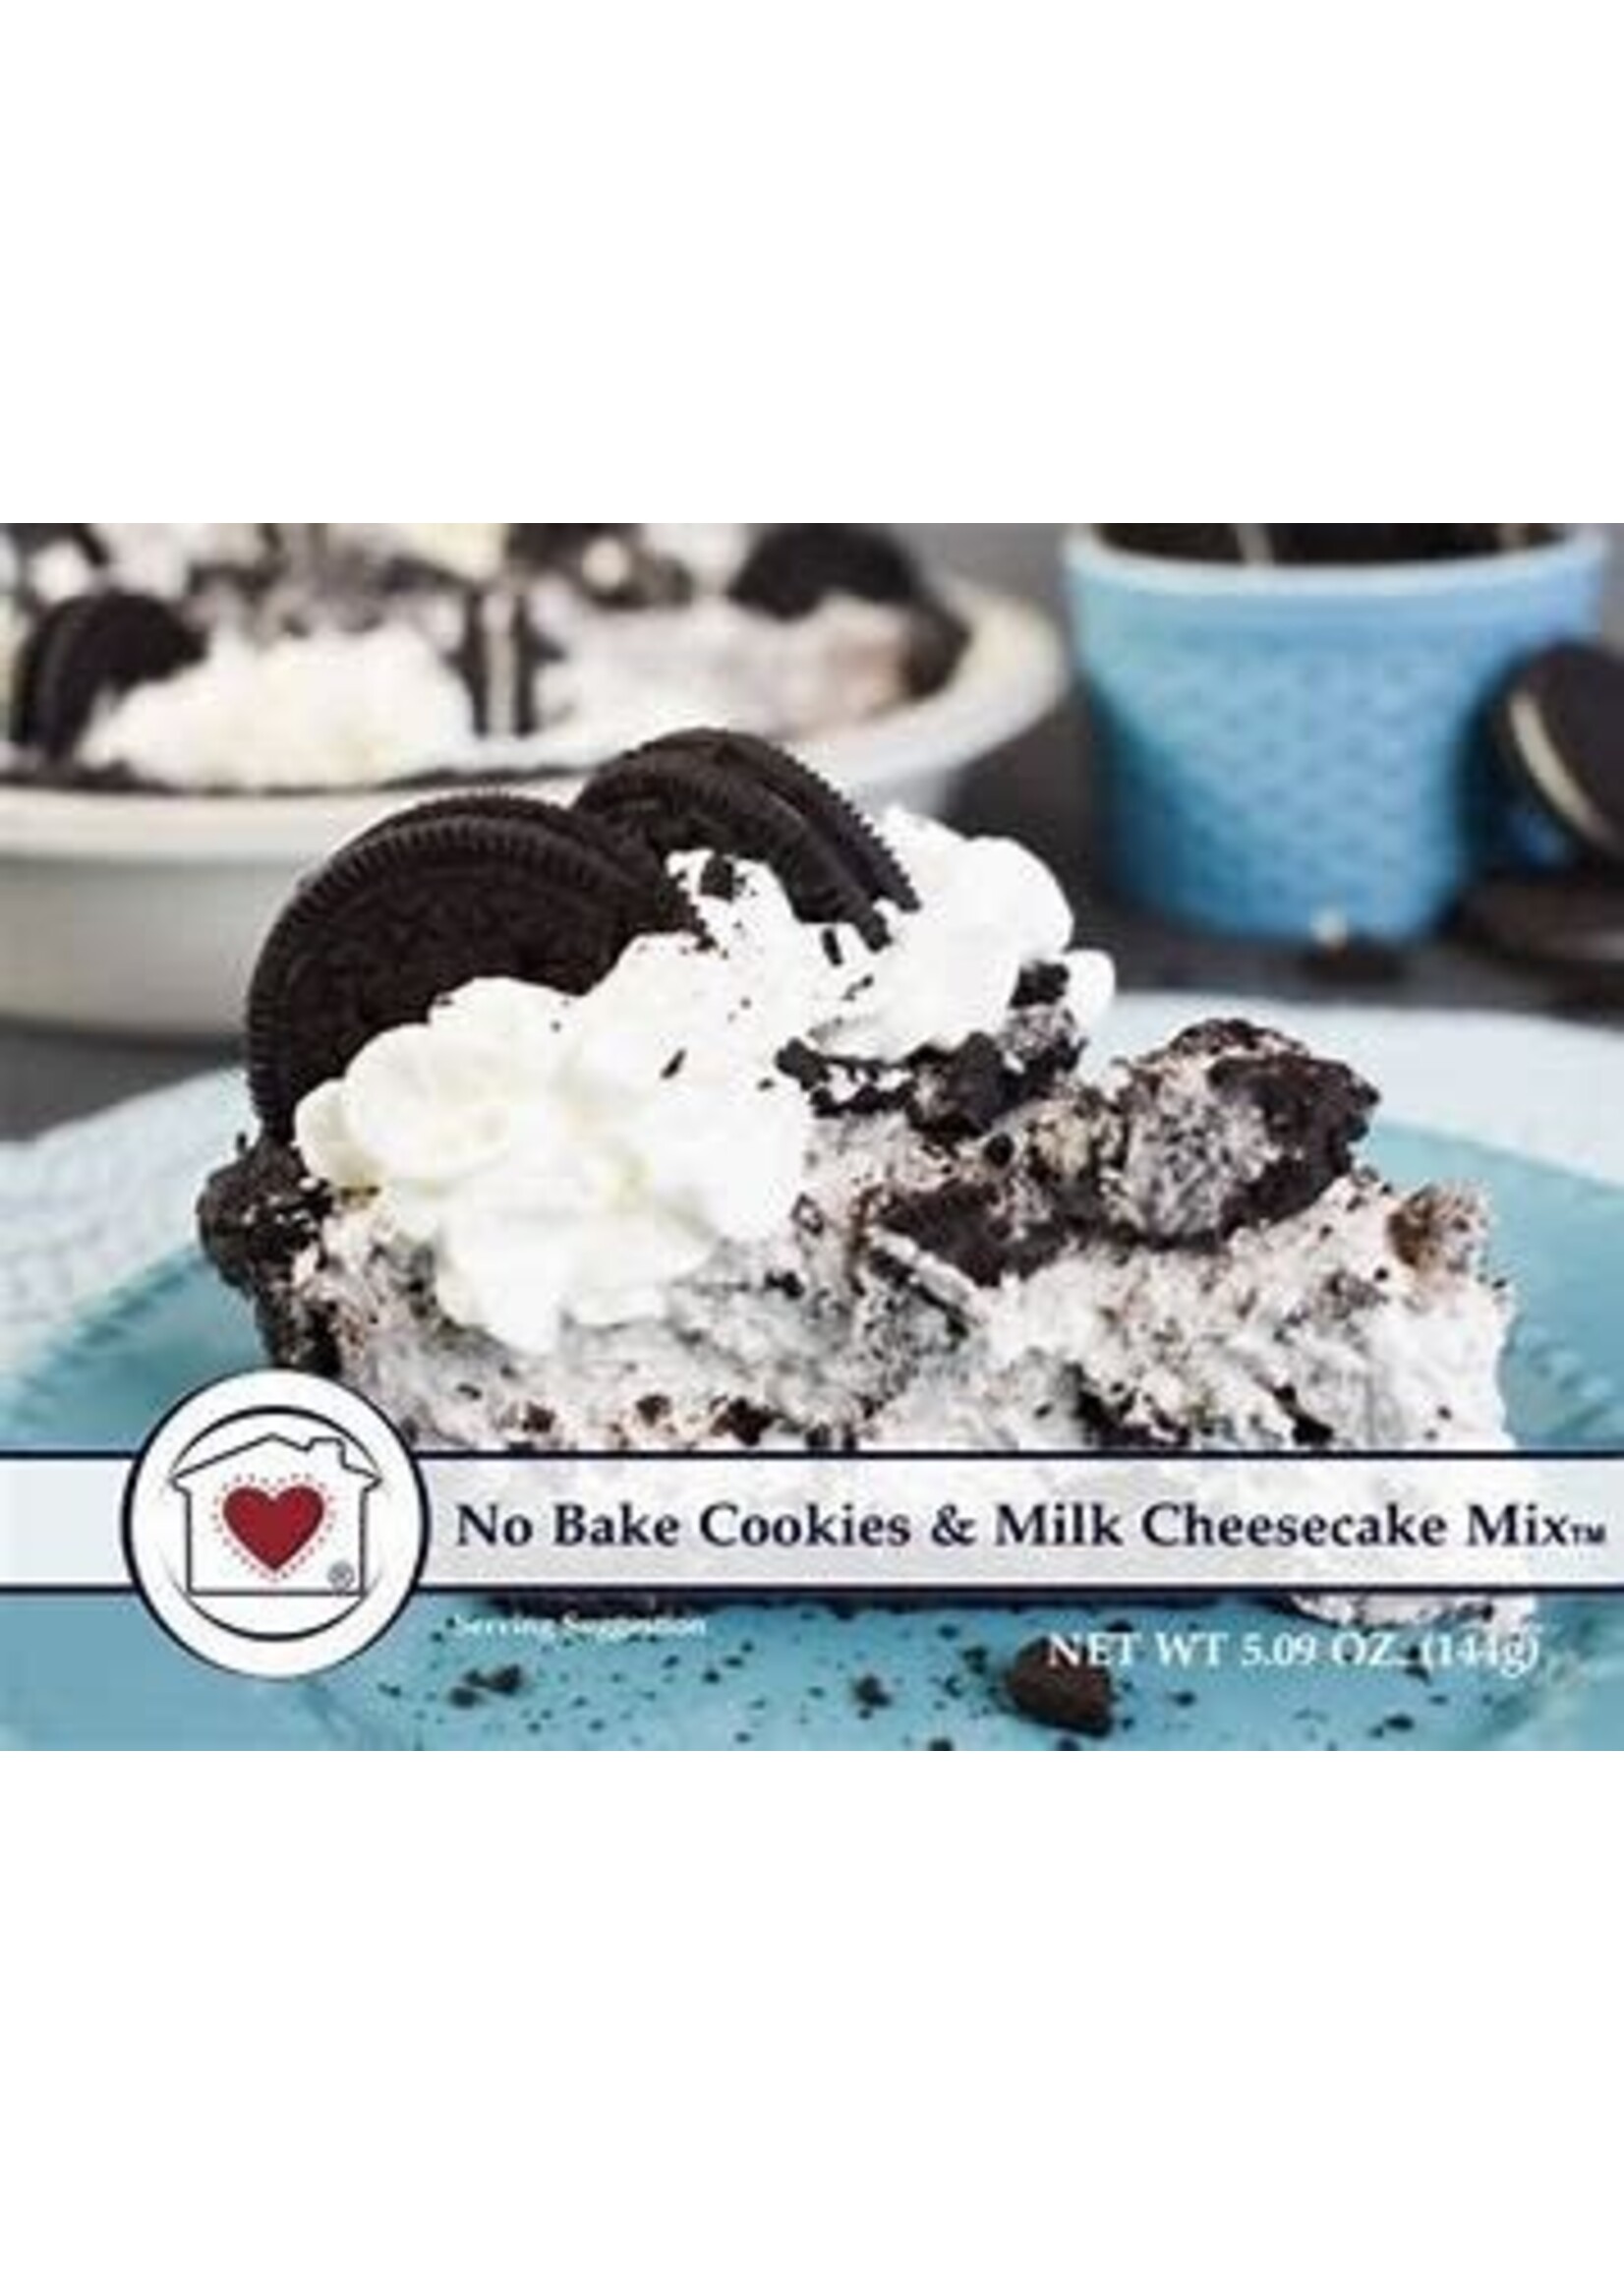 Country Home Creations No Bake Cookies & Milk Cheesecake Mix